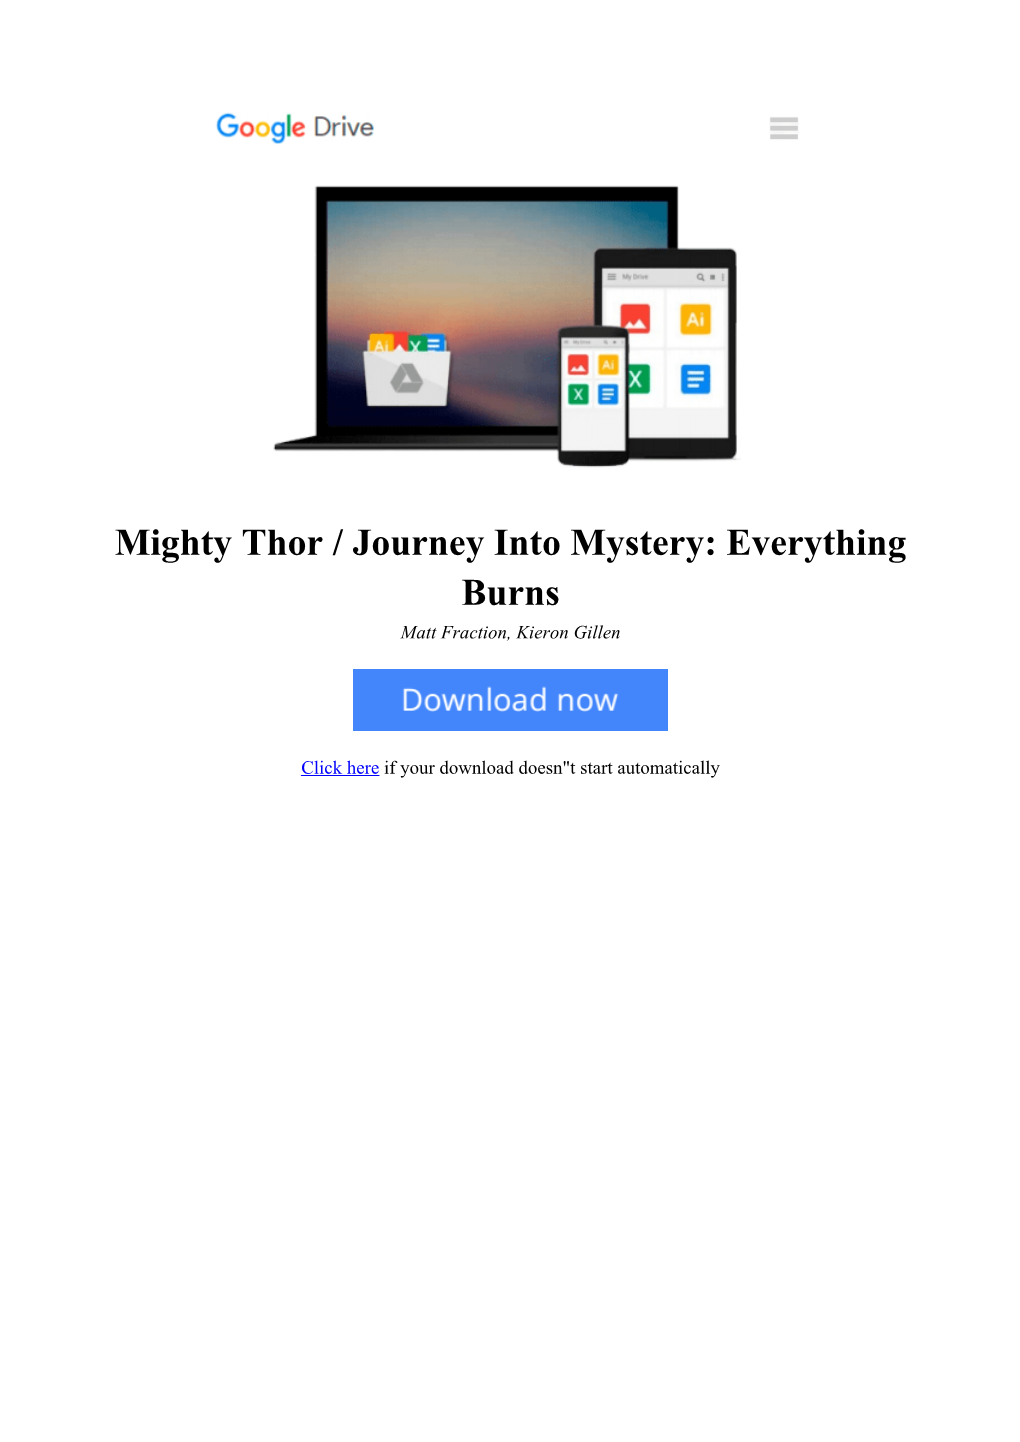 [KGBE]⋙ Mighty Thor / Journey Into Mystery: Everything Burns by Matt